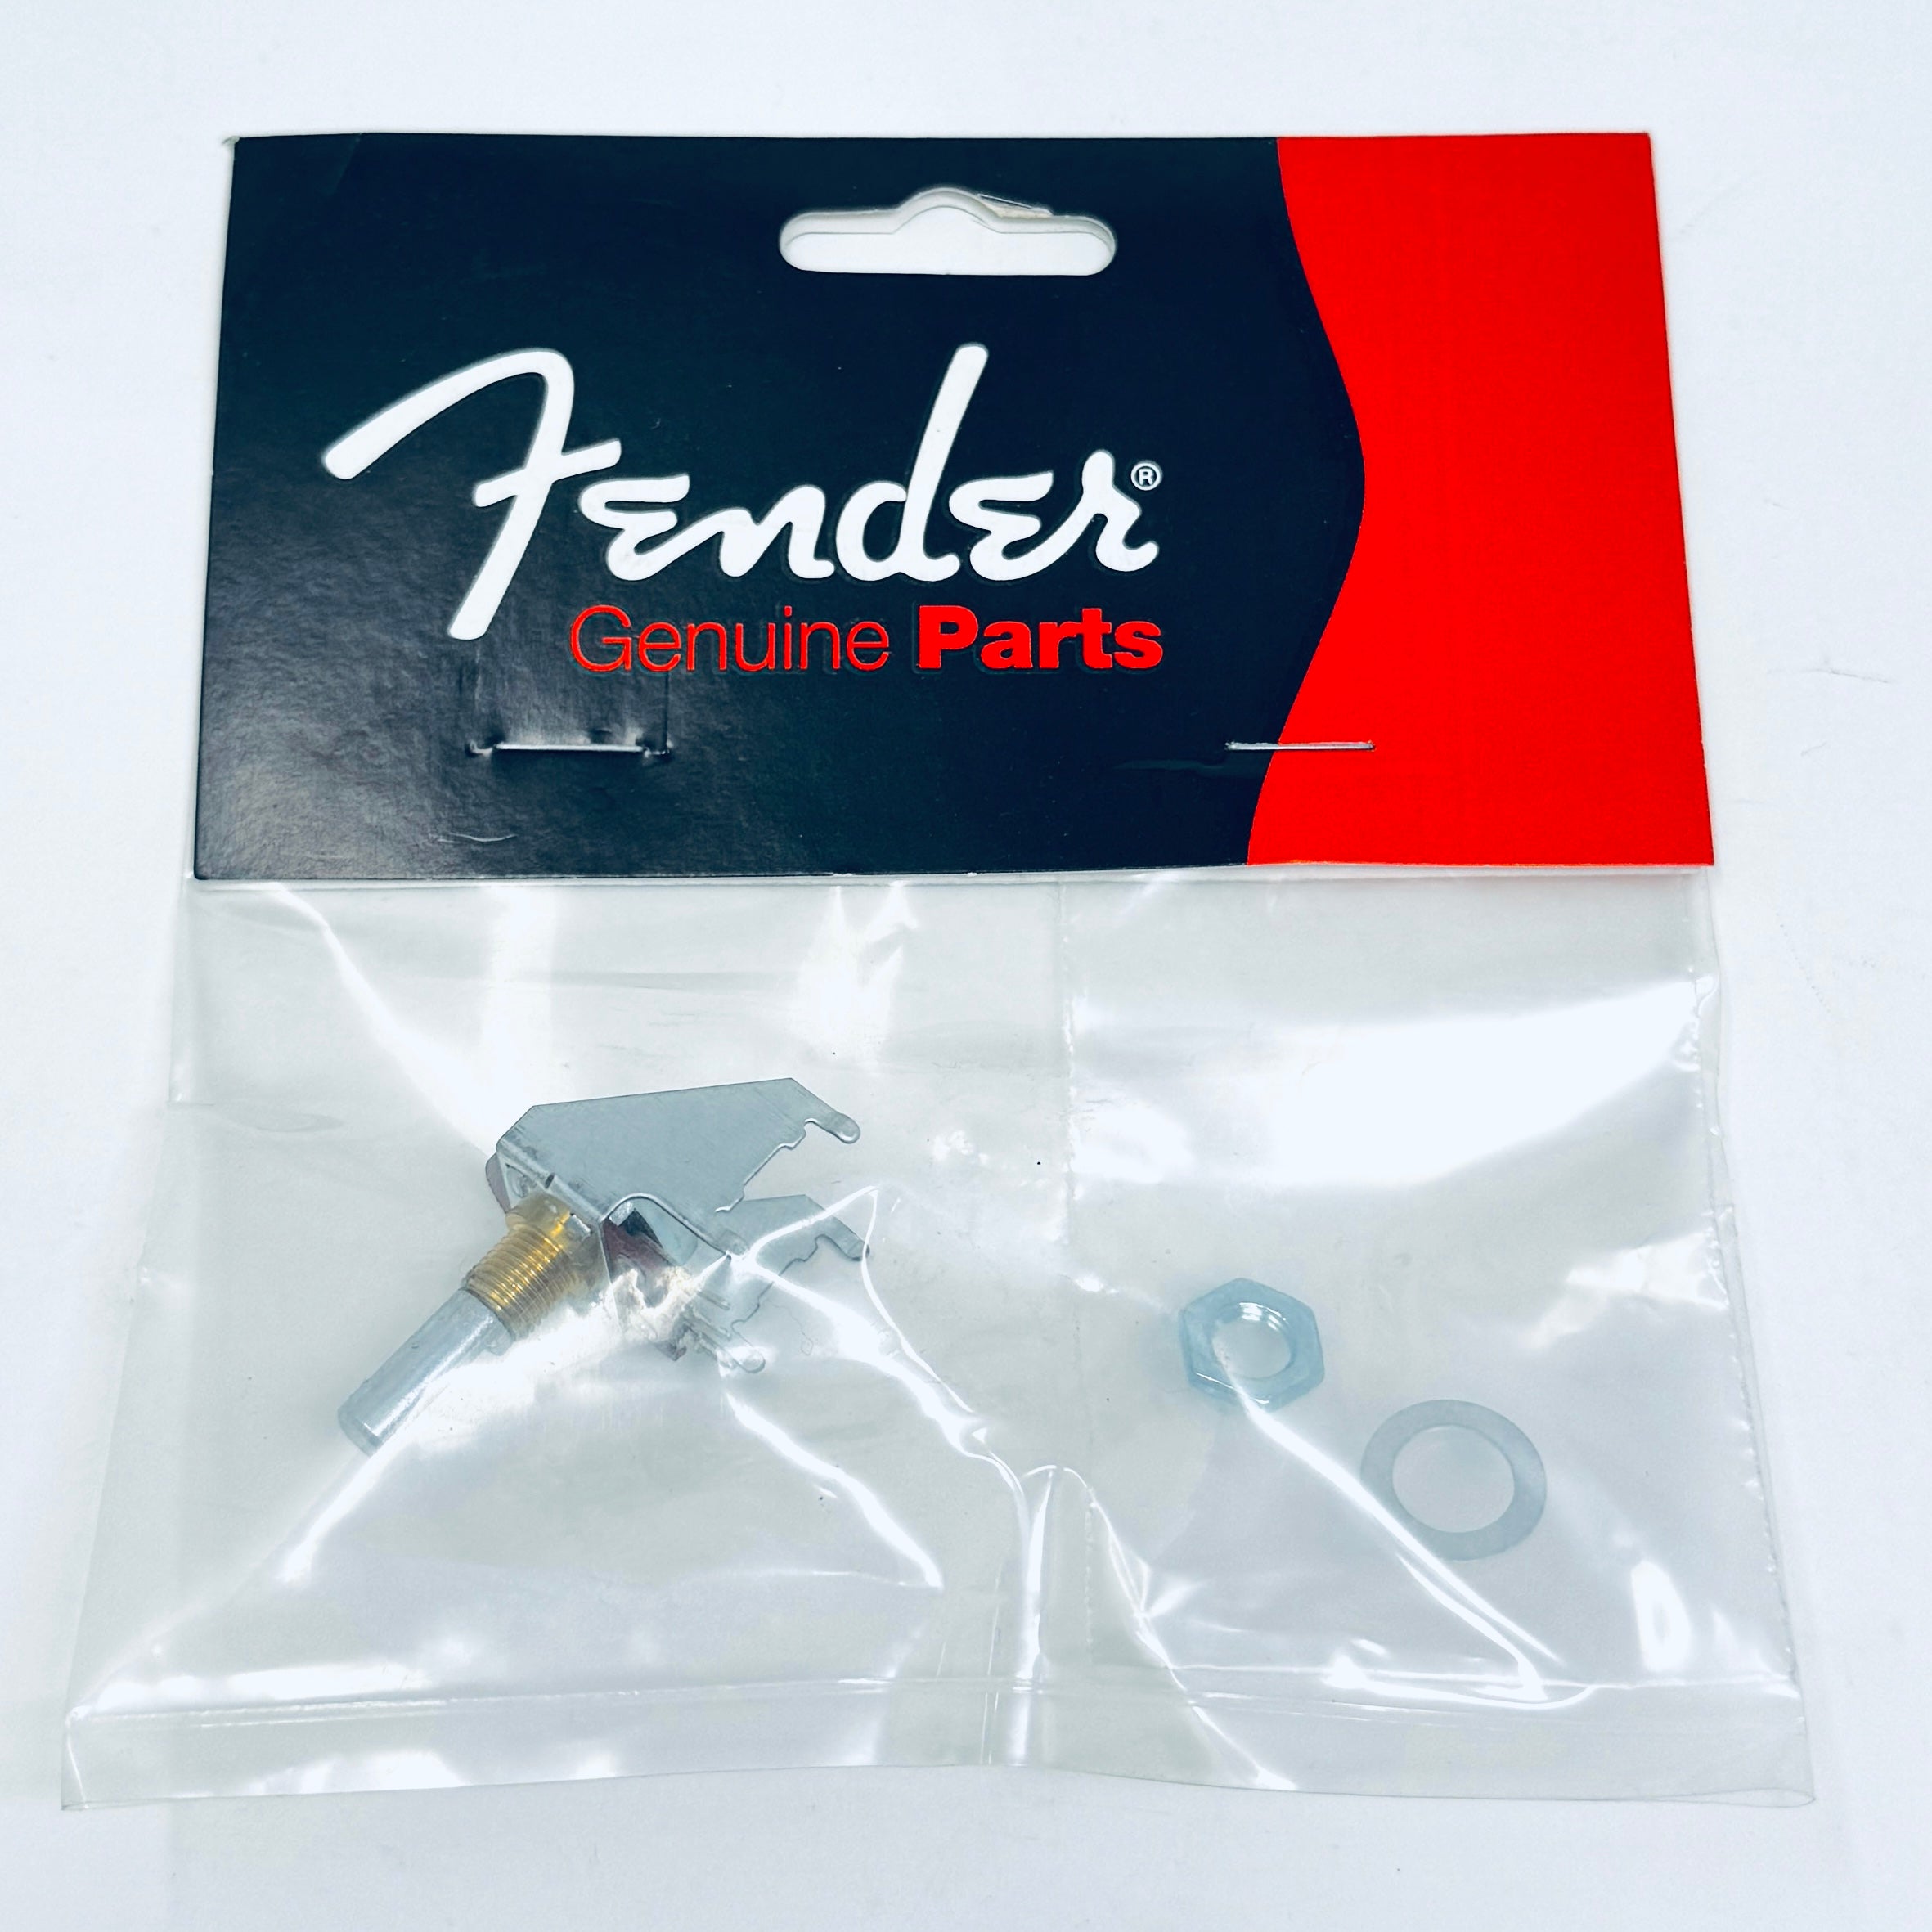 Authentic Fender Control Snapin 50k 30c Taper Potentiometer, authentic fender replacment parts, ruby parts